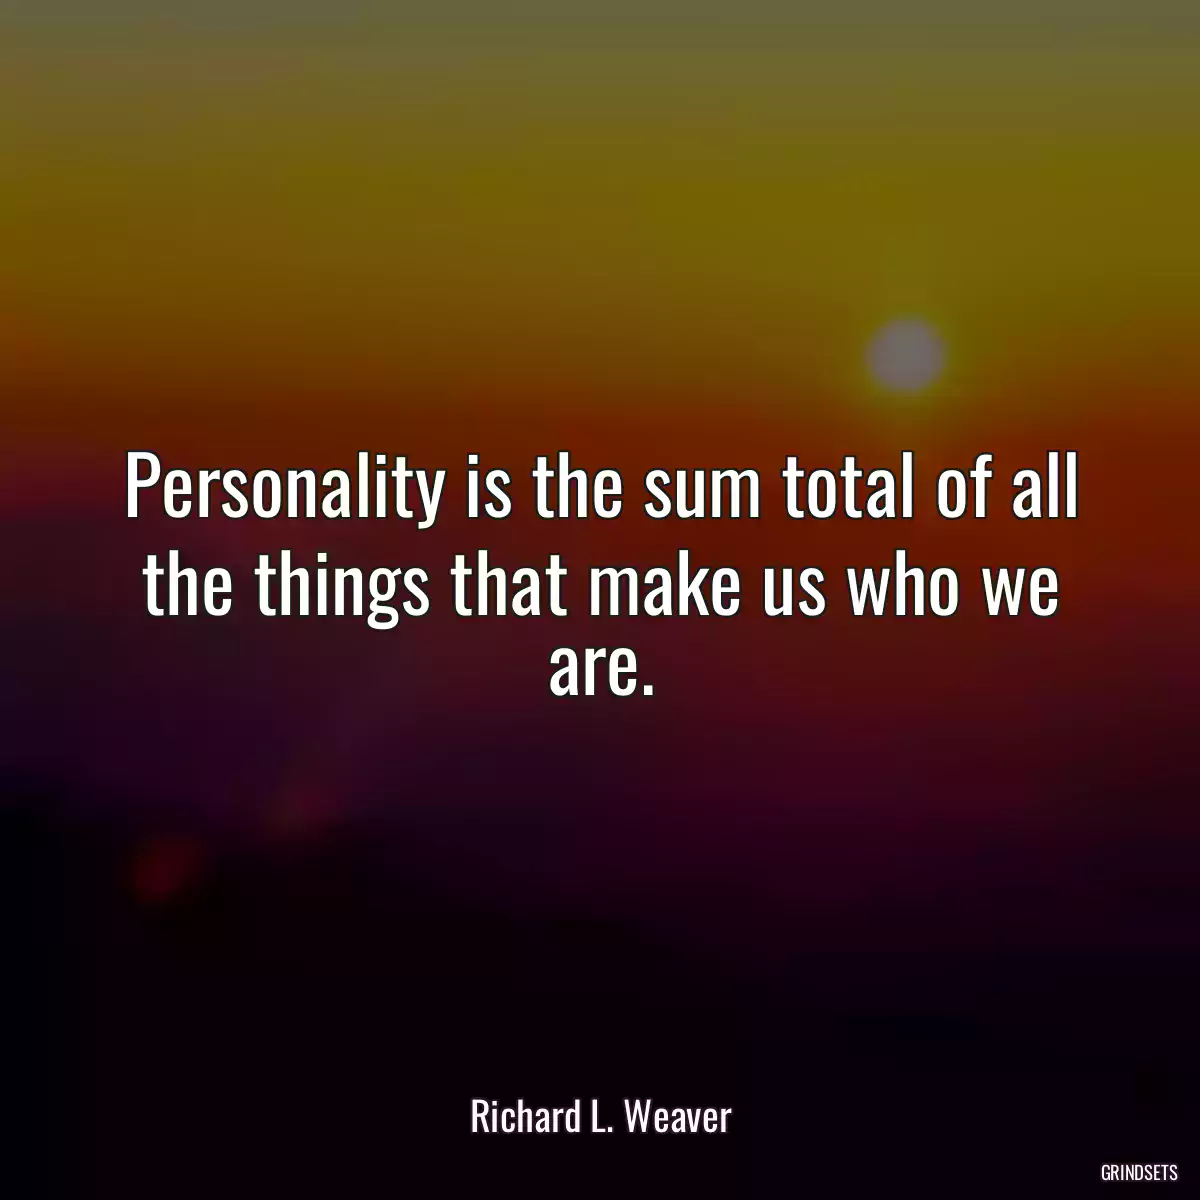 Personality is the sum total of all the things that make us who we are.